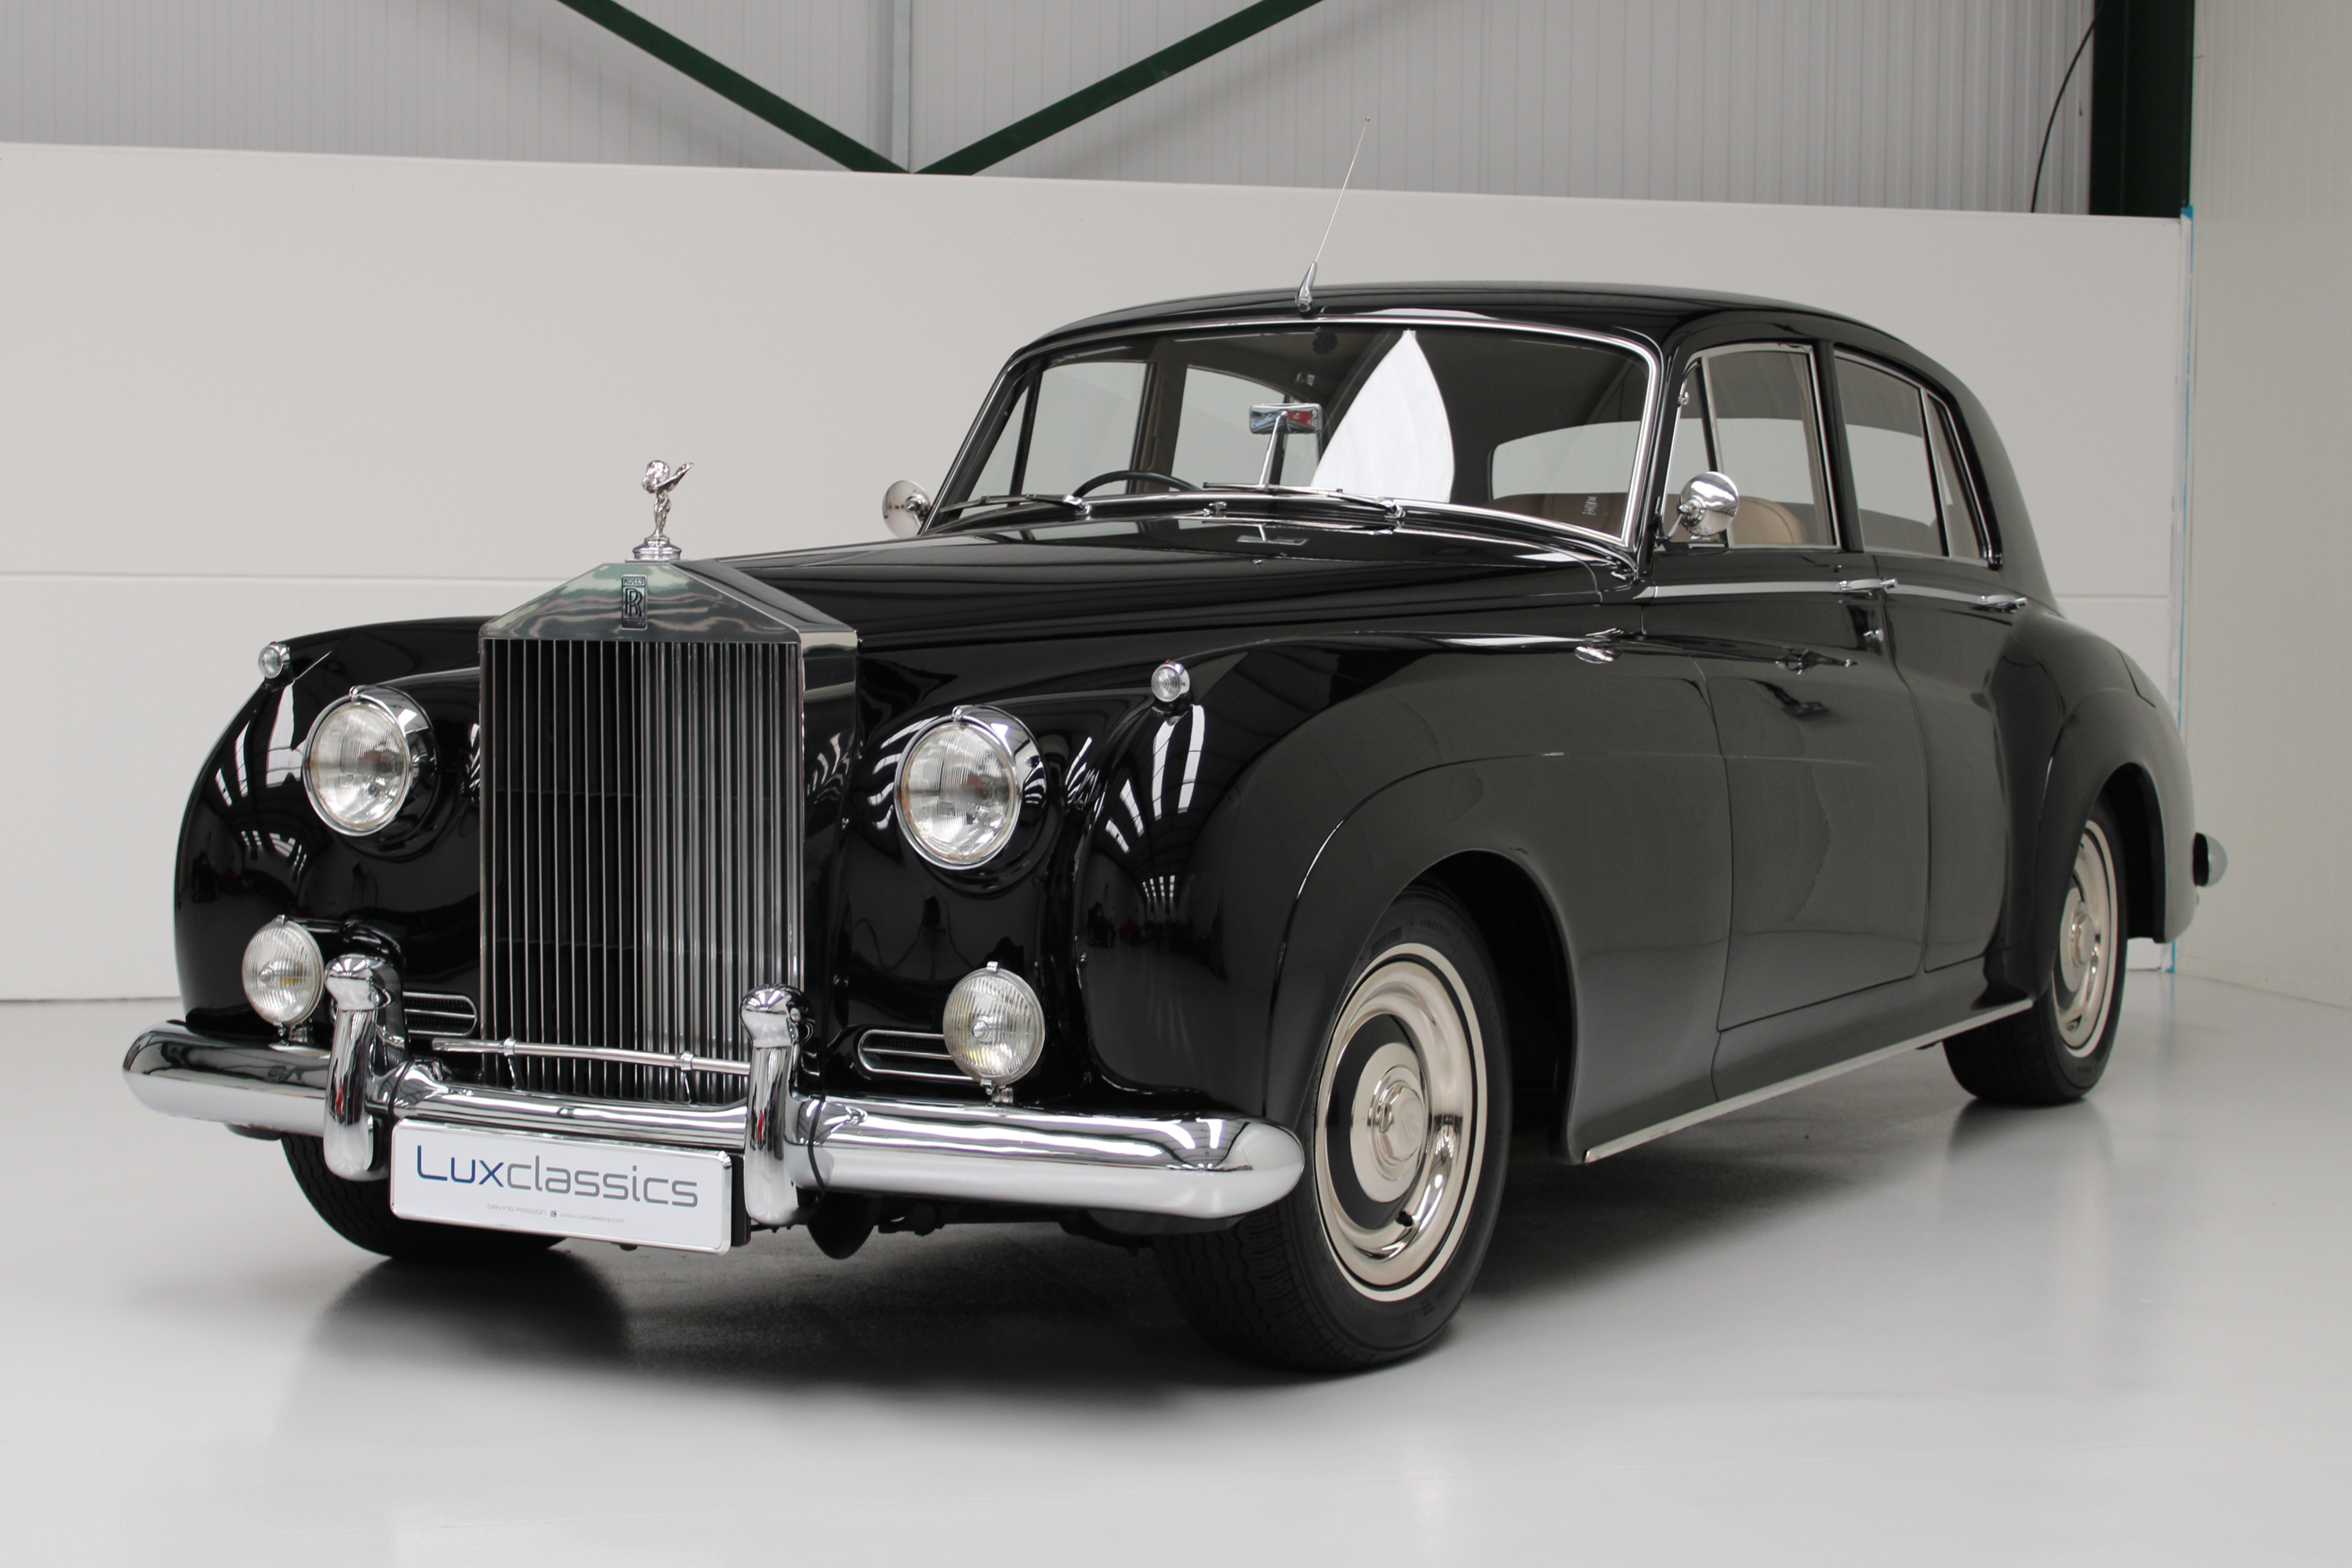 Used 1961 Rolls Royce Cloud II 6.8 4dr Saloon Automatic Petrol For Sale ...